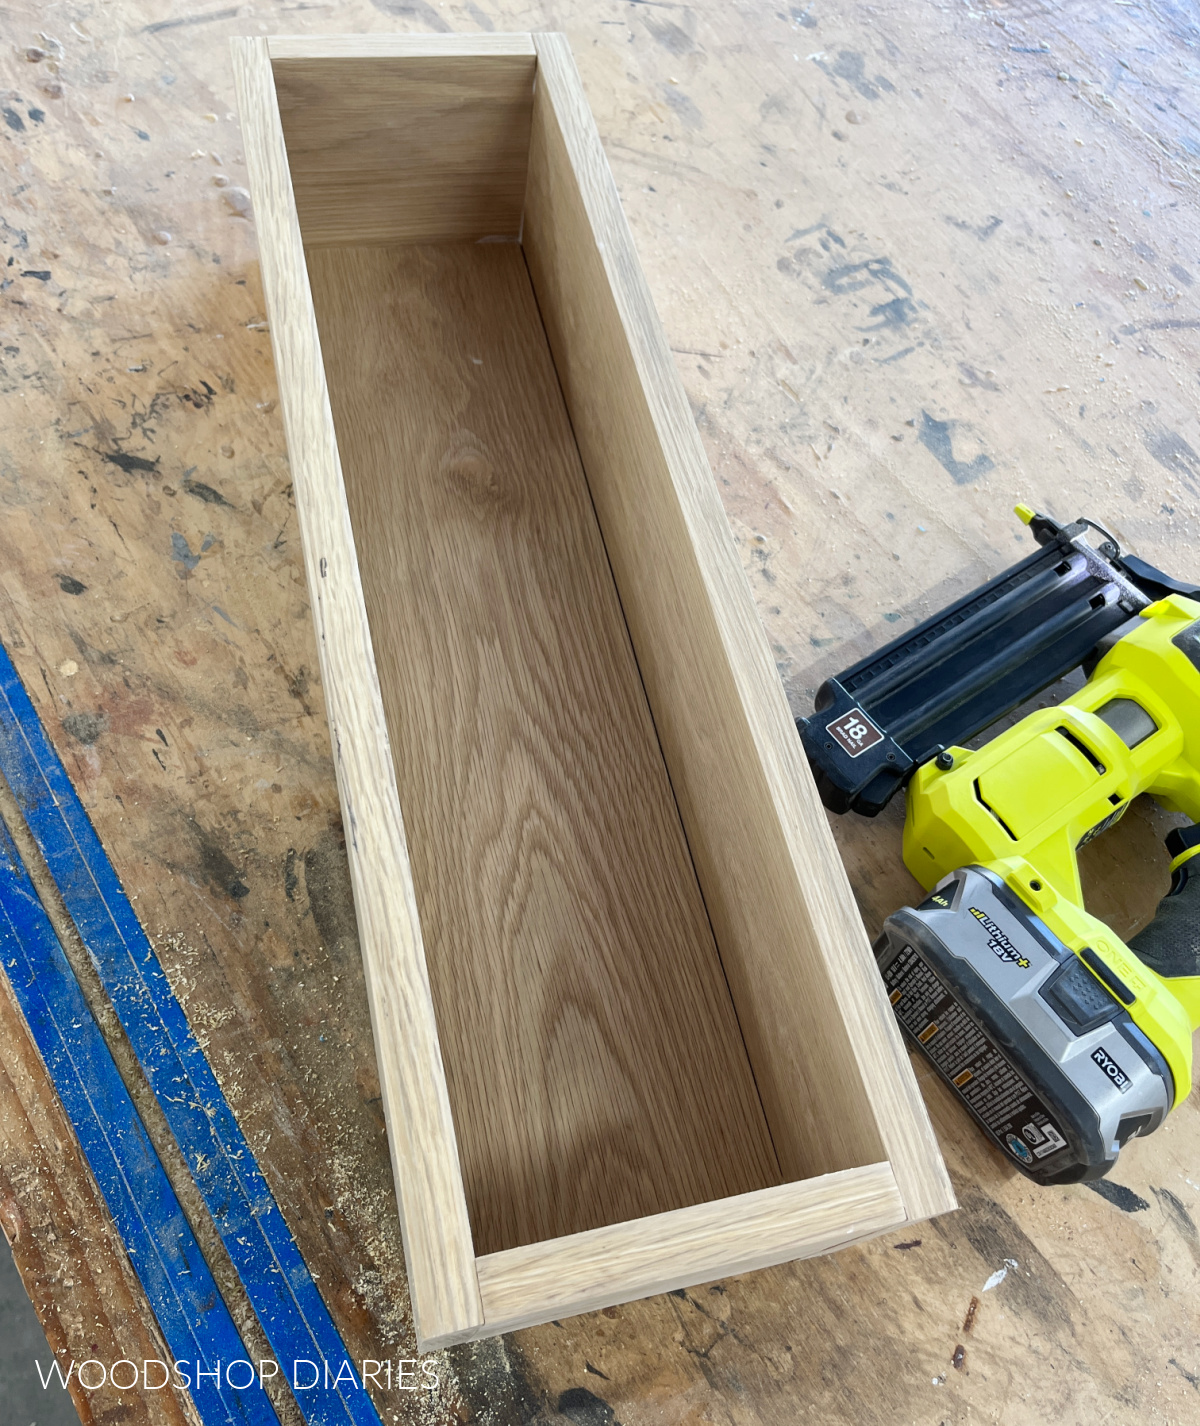 Wooden box fully assembled on workbench